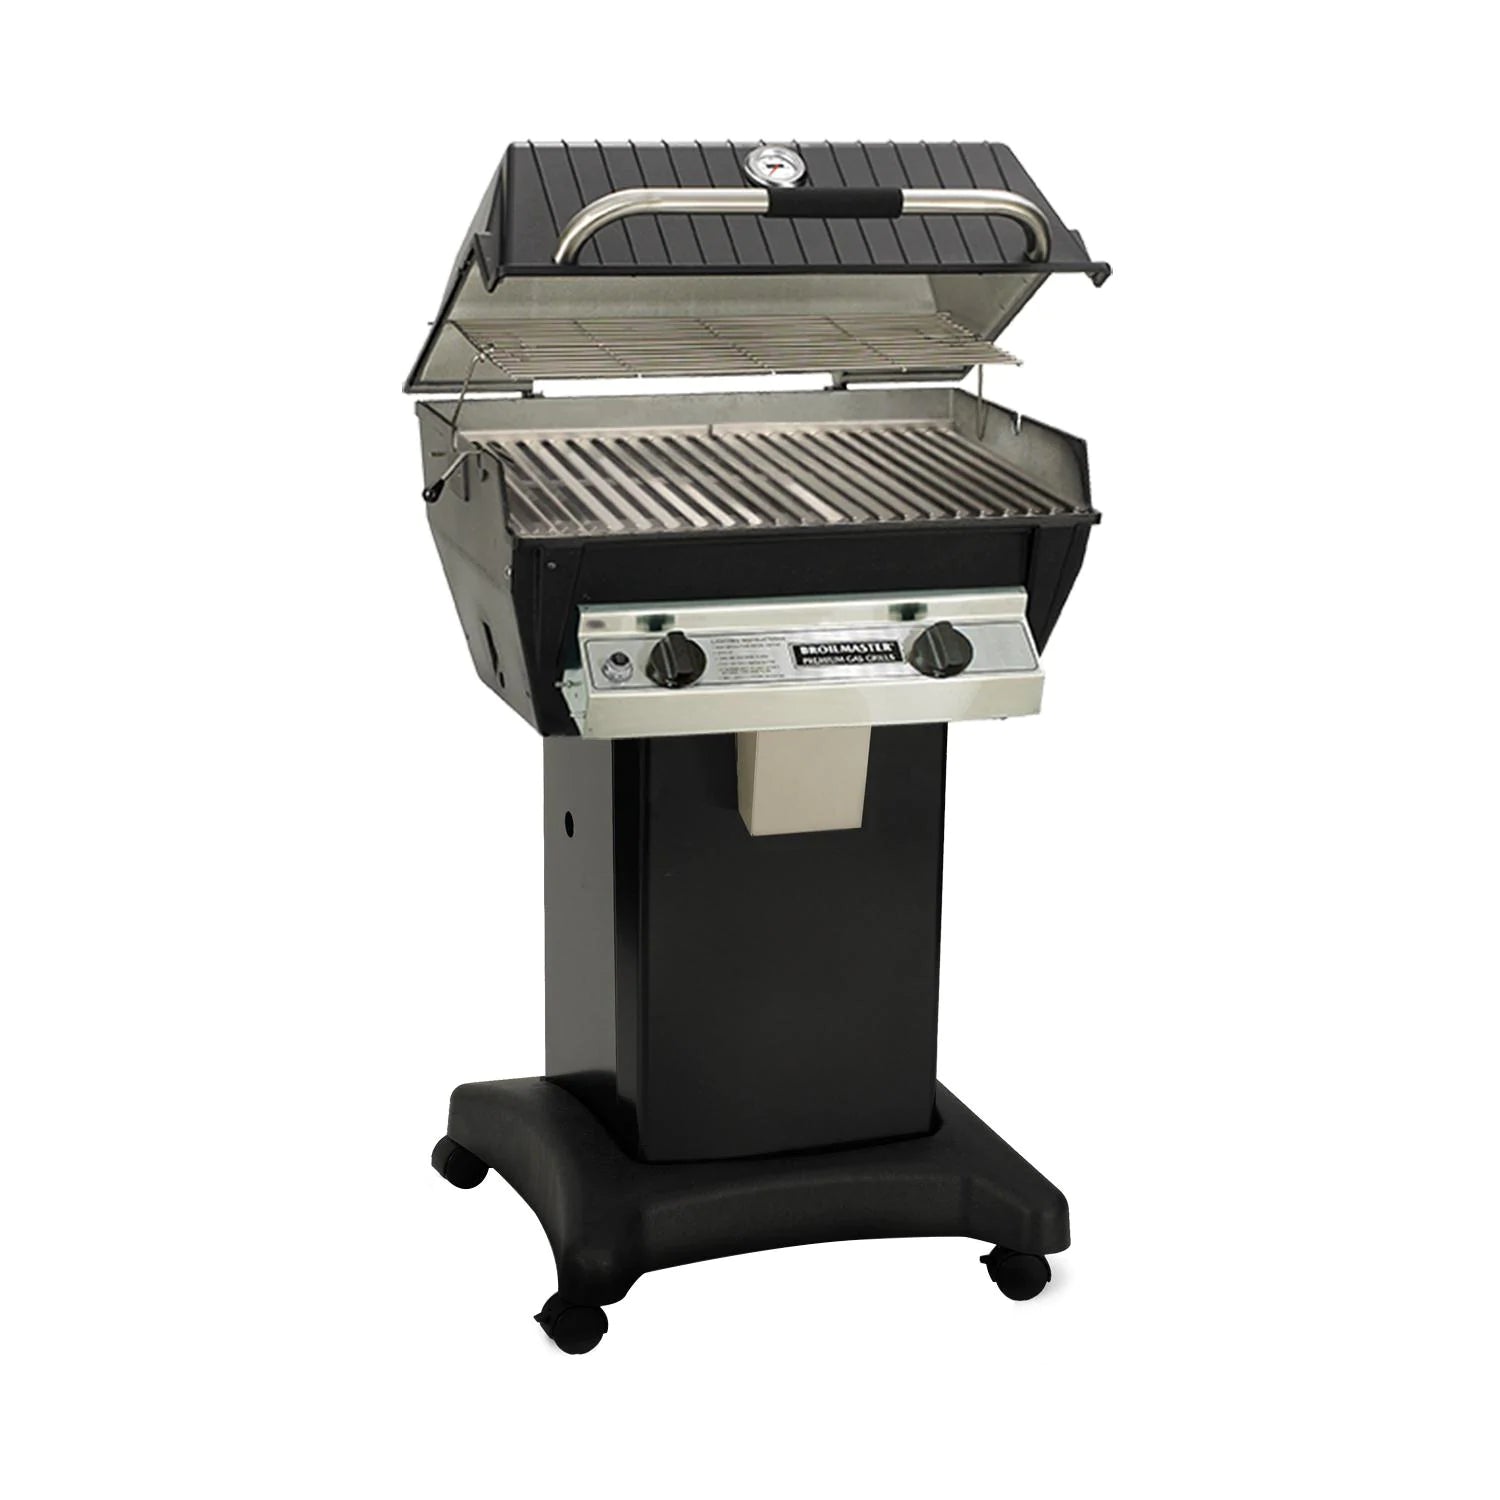 Broilmaster Infrared Gas Grill - R3 - Grills N More